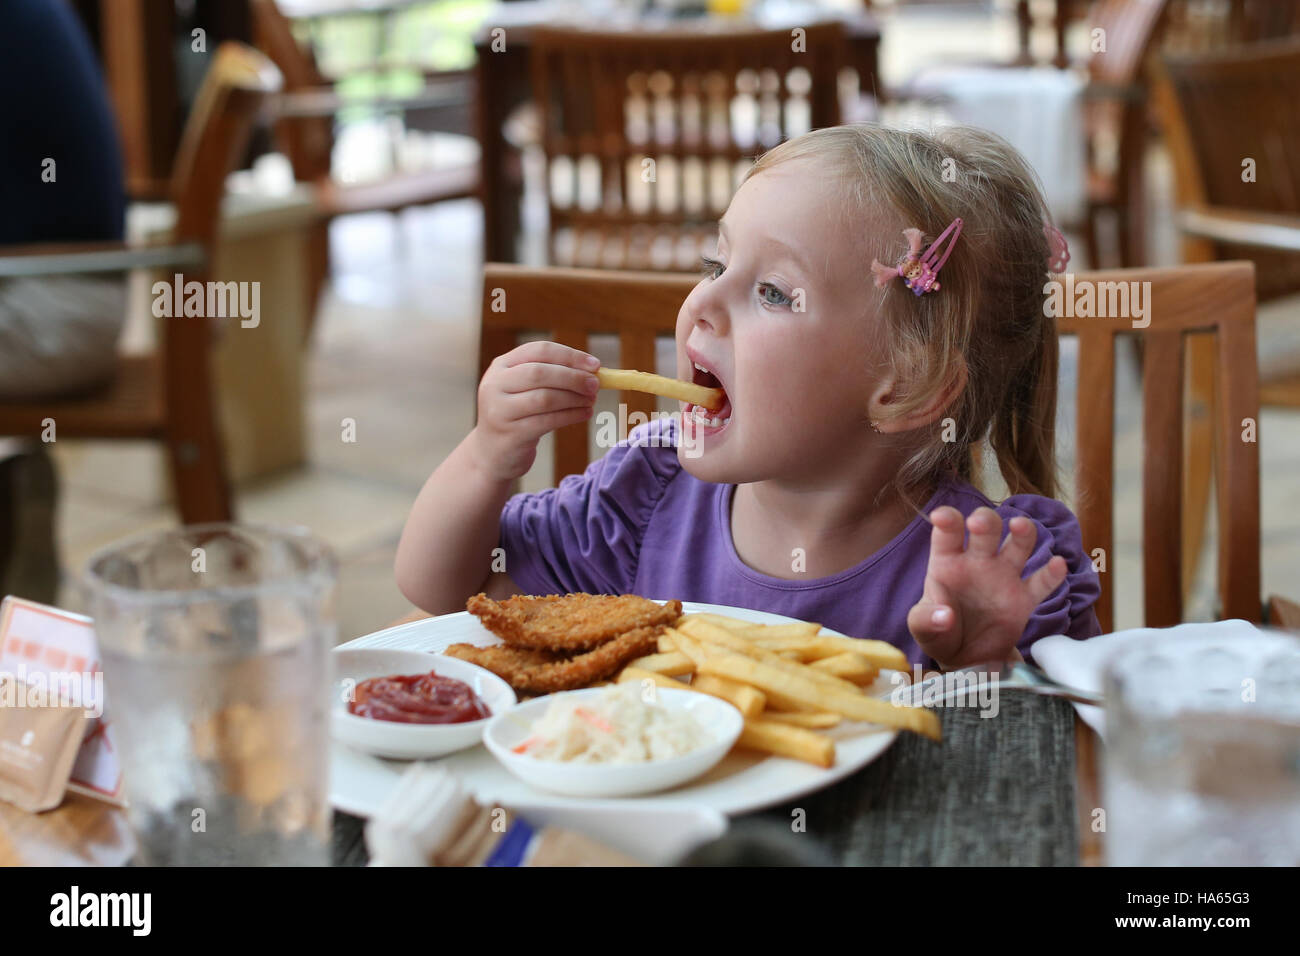 Girl eating French fries. Stock Photo